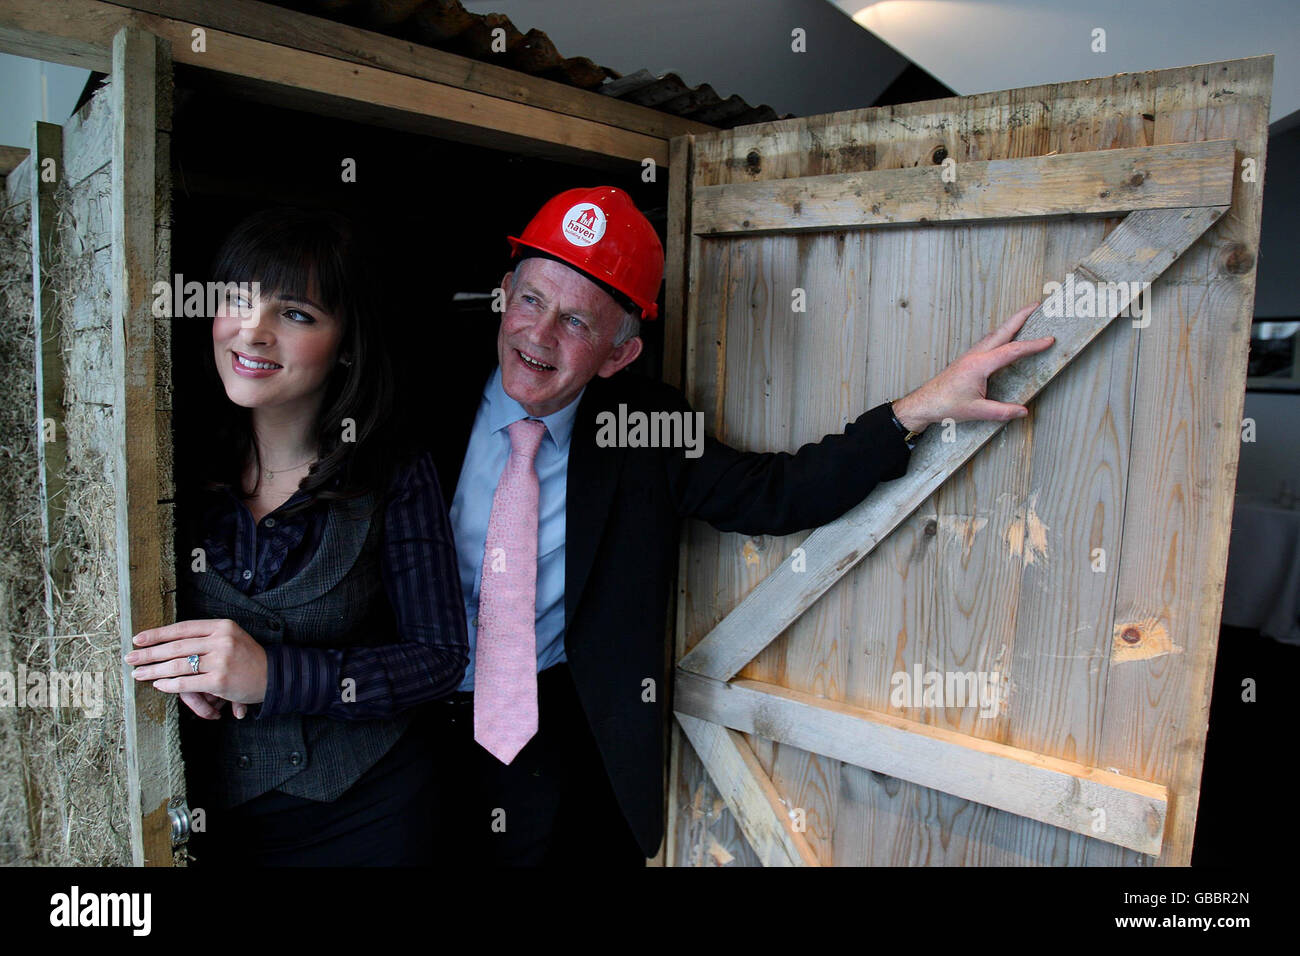 TV presenter Grainne Seoige and businessman Leslie Buckley launch the International Association of New Haven to run house building projects in Haiti, at the Volunteering Centre on O'Connell Street in Dublin. Stock Photo